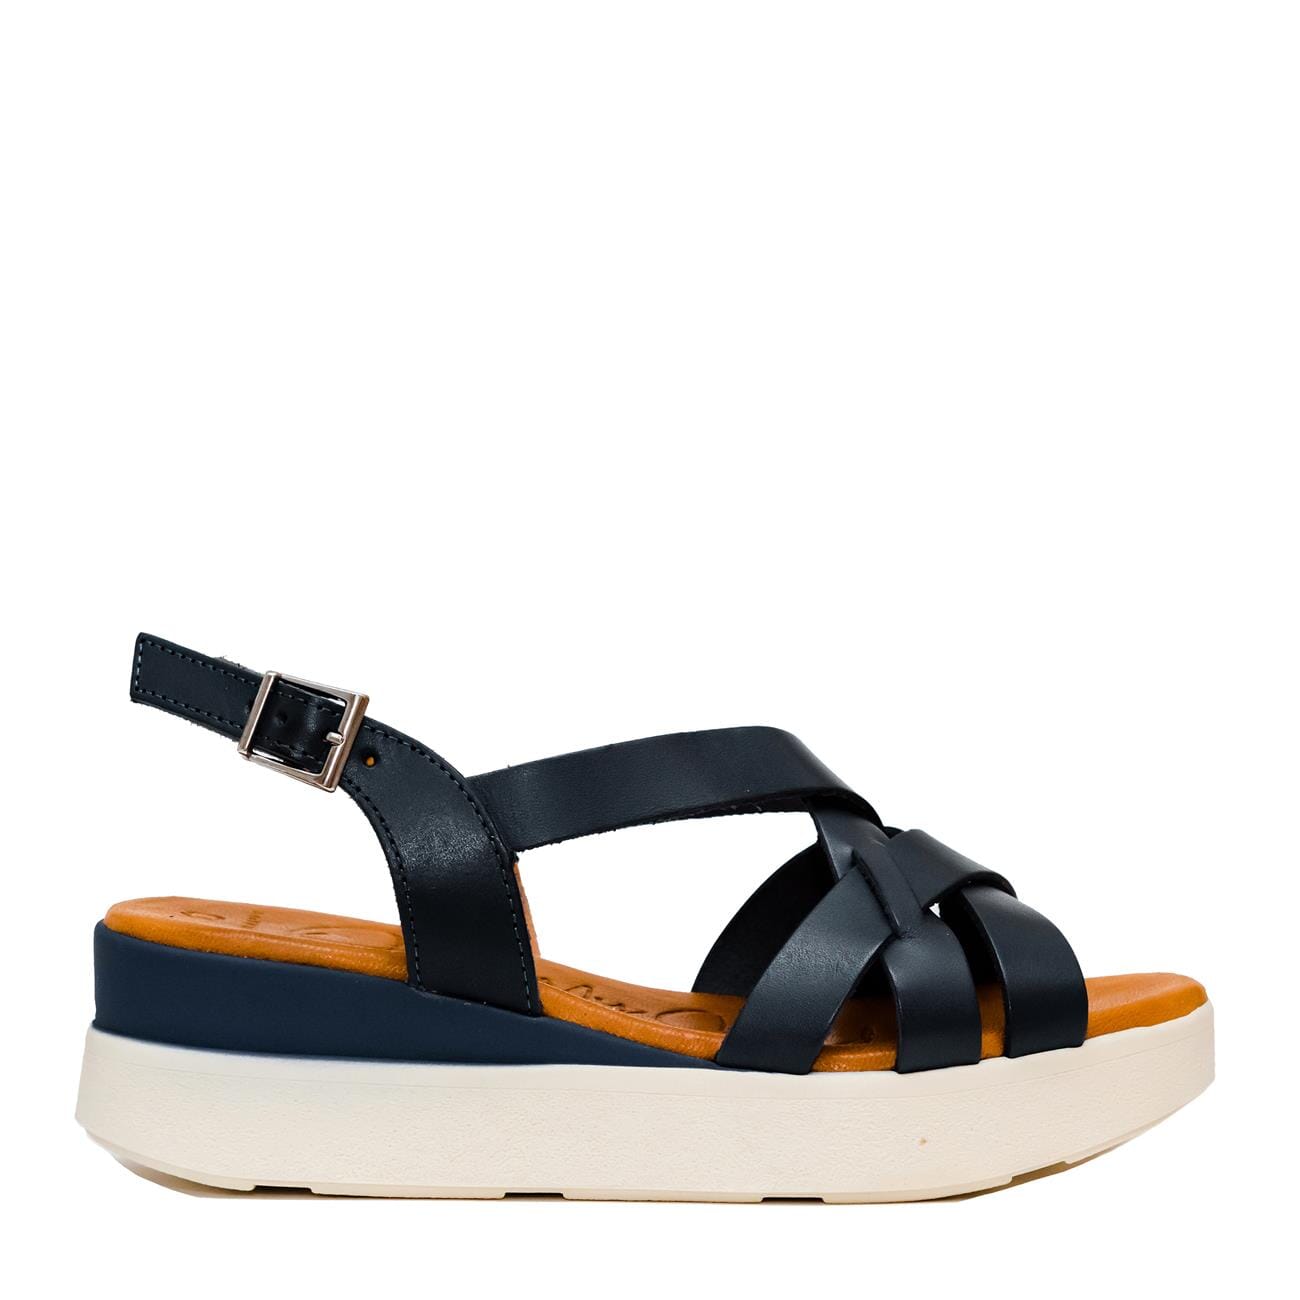 5188 Spanish leather crossed strappy sandals/wedge in Tan and Navy sandals Sam Star Shoes 